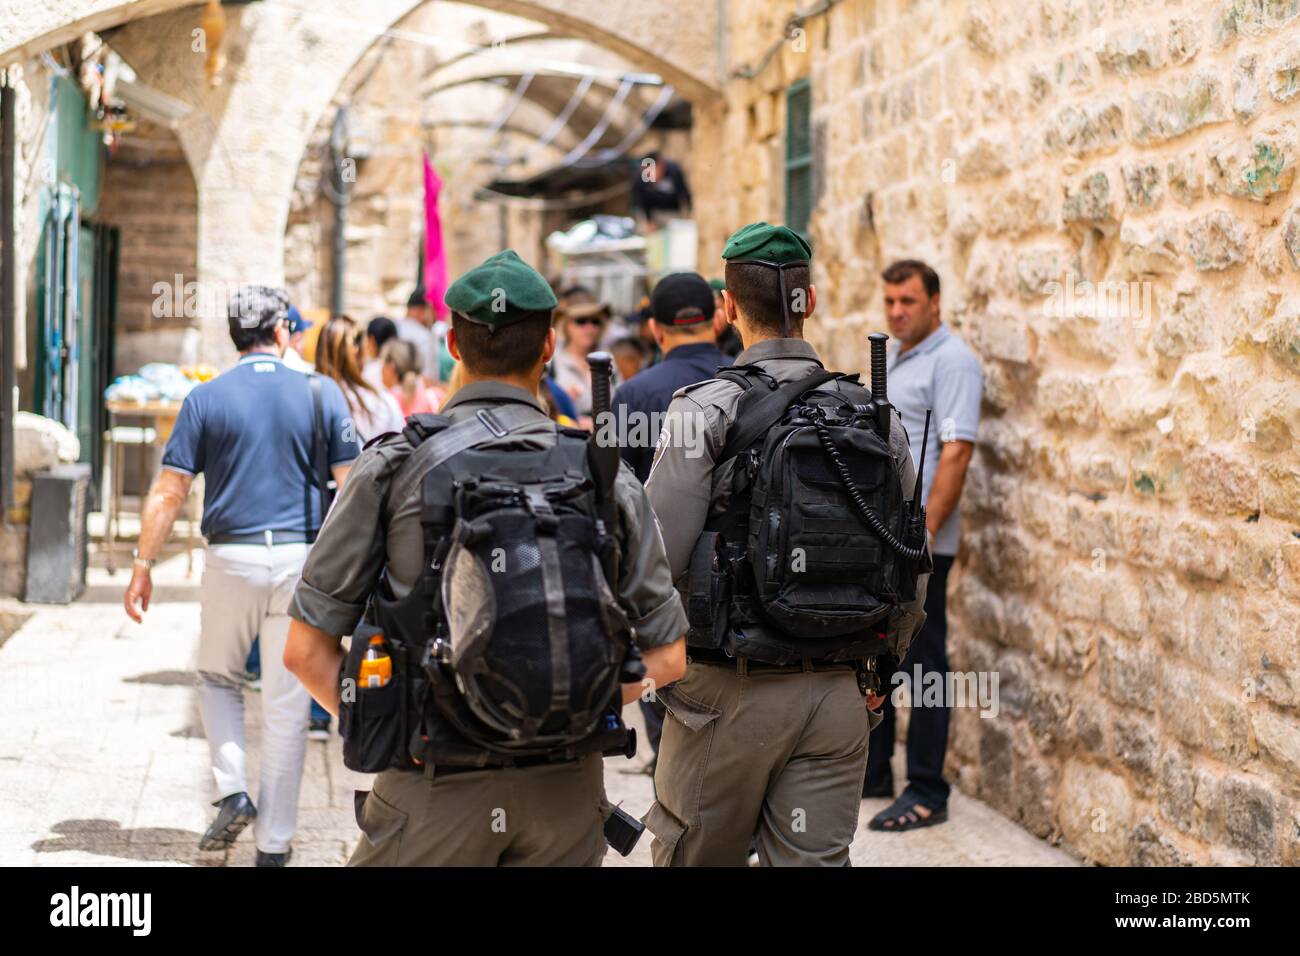 Israeli Border police soldiers patrol an Alley in the Old City, Jerusalem, Israel Stock Photo